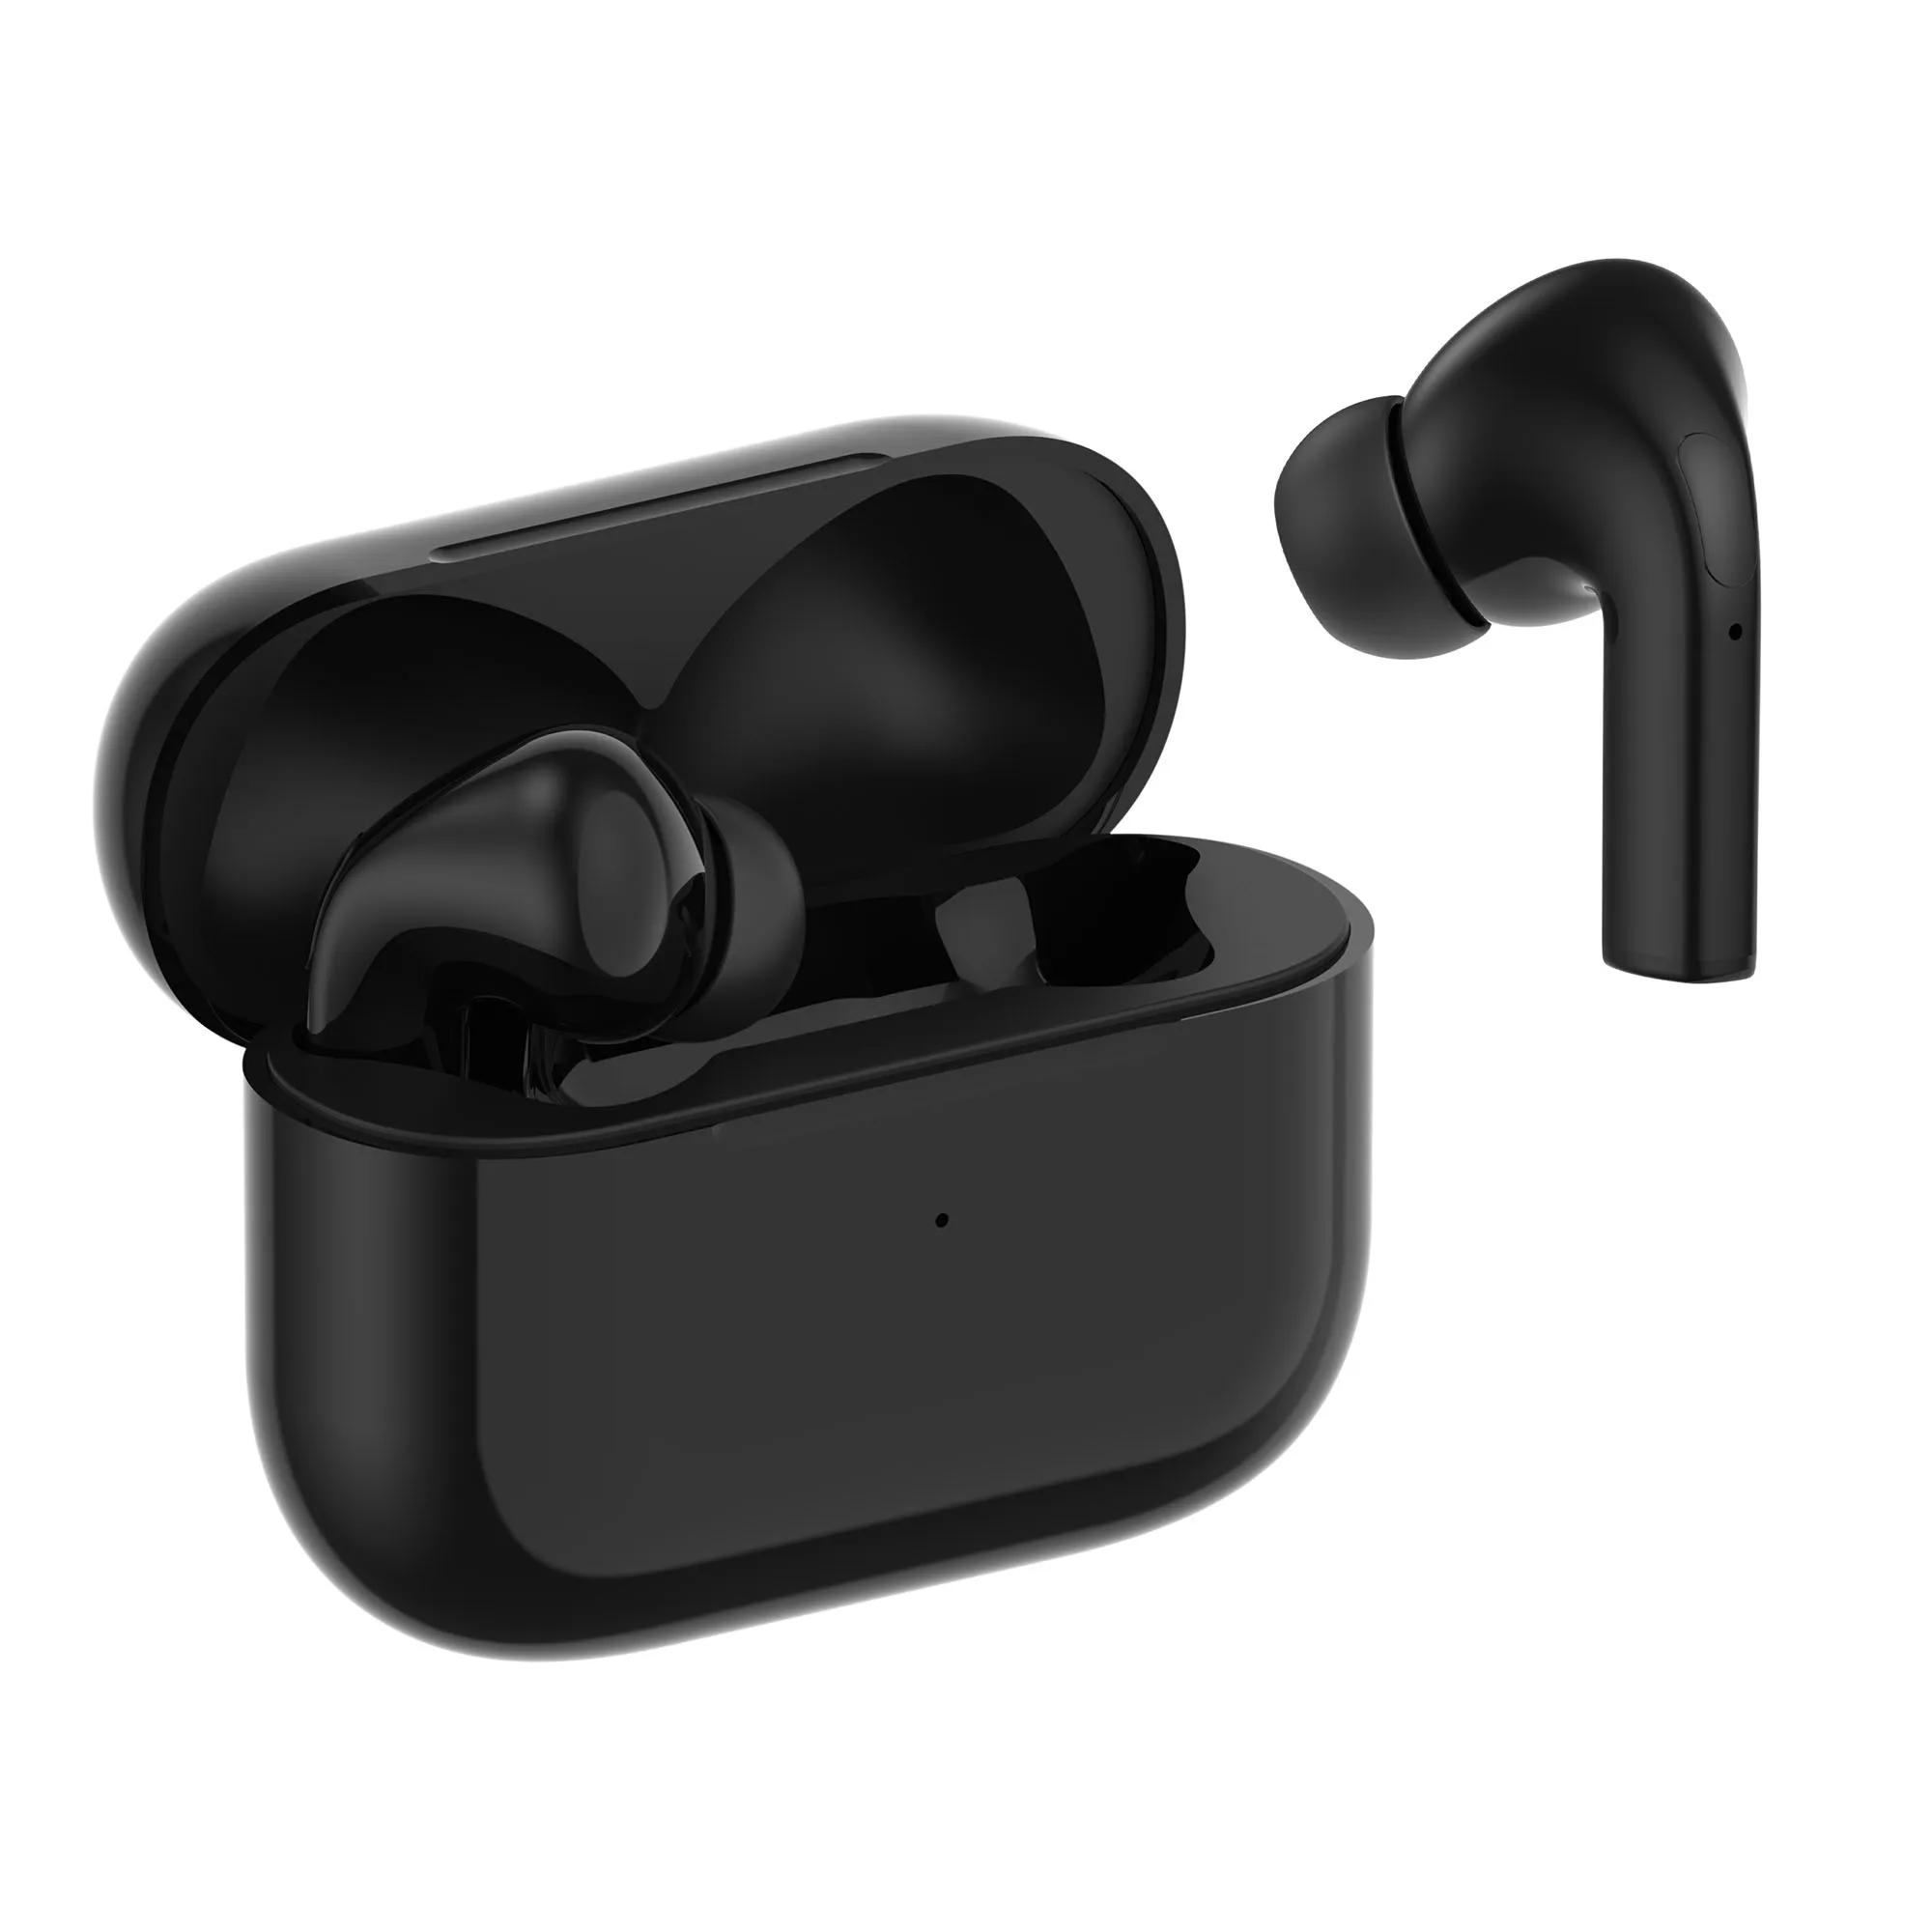 grot Afstudeeralbum onkruid Built In Charging Case Portable Invisible Bt Earpiece Touch Control True  Twins Tws Bluetooth Wireless I10 Mini Headphone - Buy I10 Mini Headphone,Wireless  I10 Mini Headphone,Tws Bluetooth Wireless I10 Mini Headphone Product